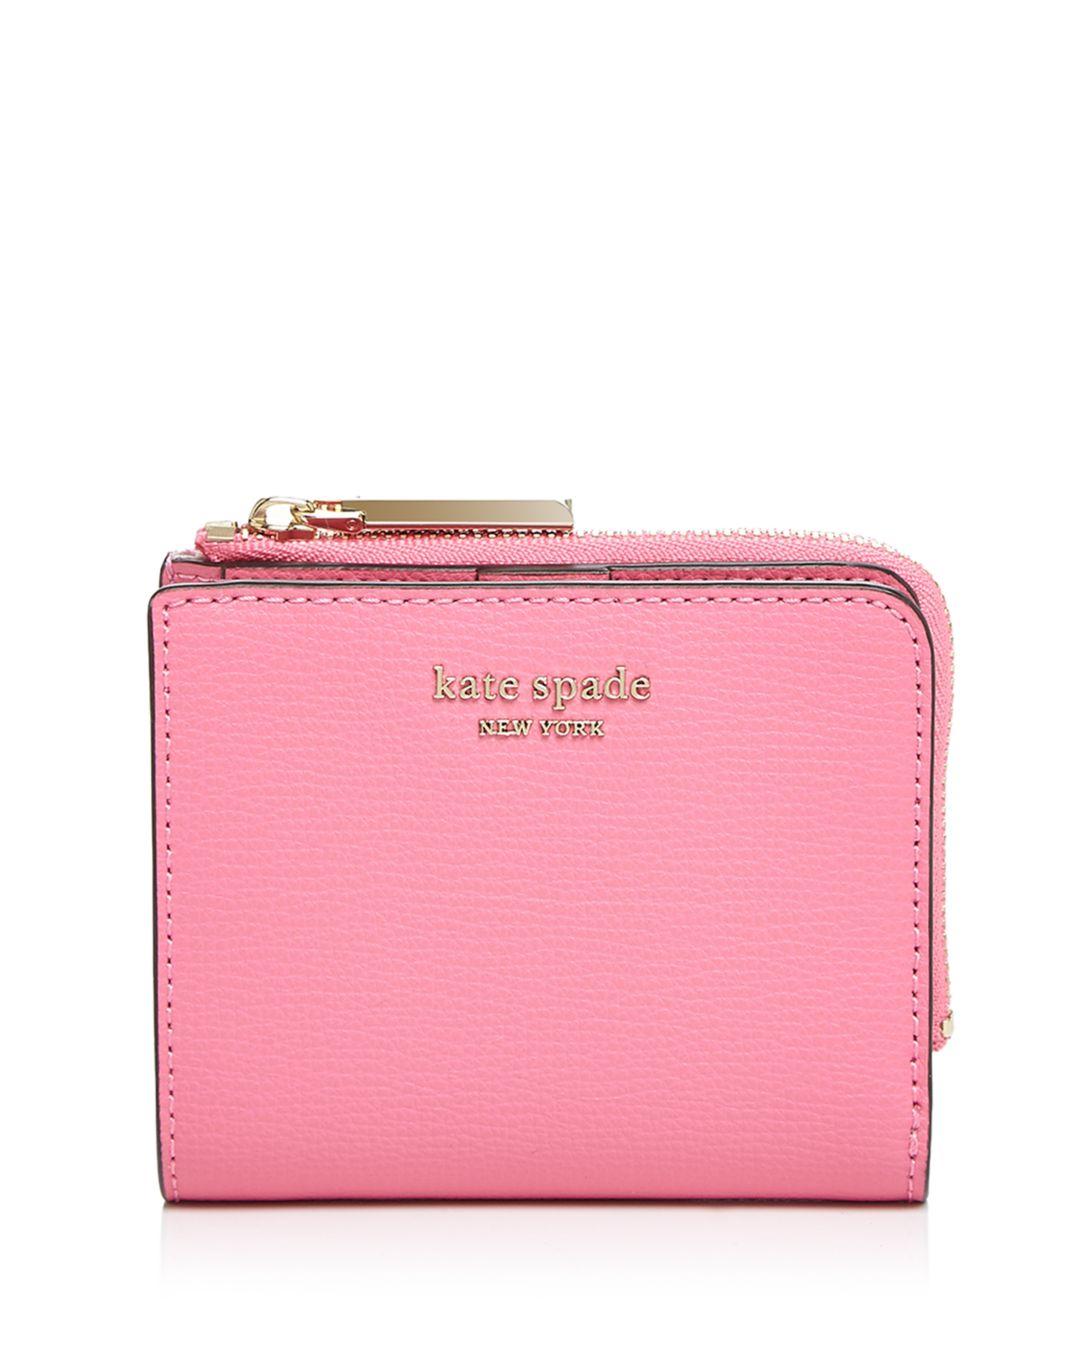 Kate Spade Sylvia Small Leather Bifold Wallet in Black - Lyst